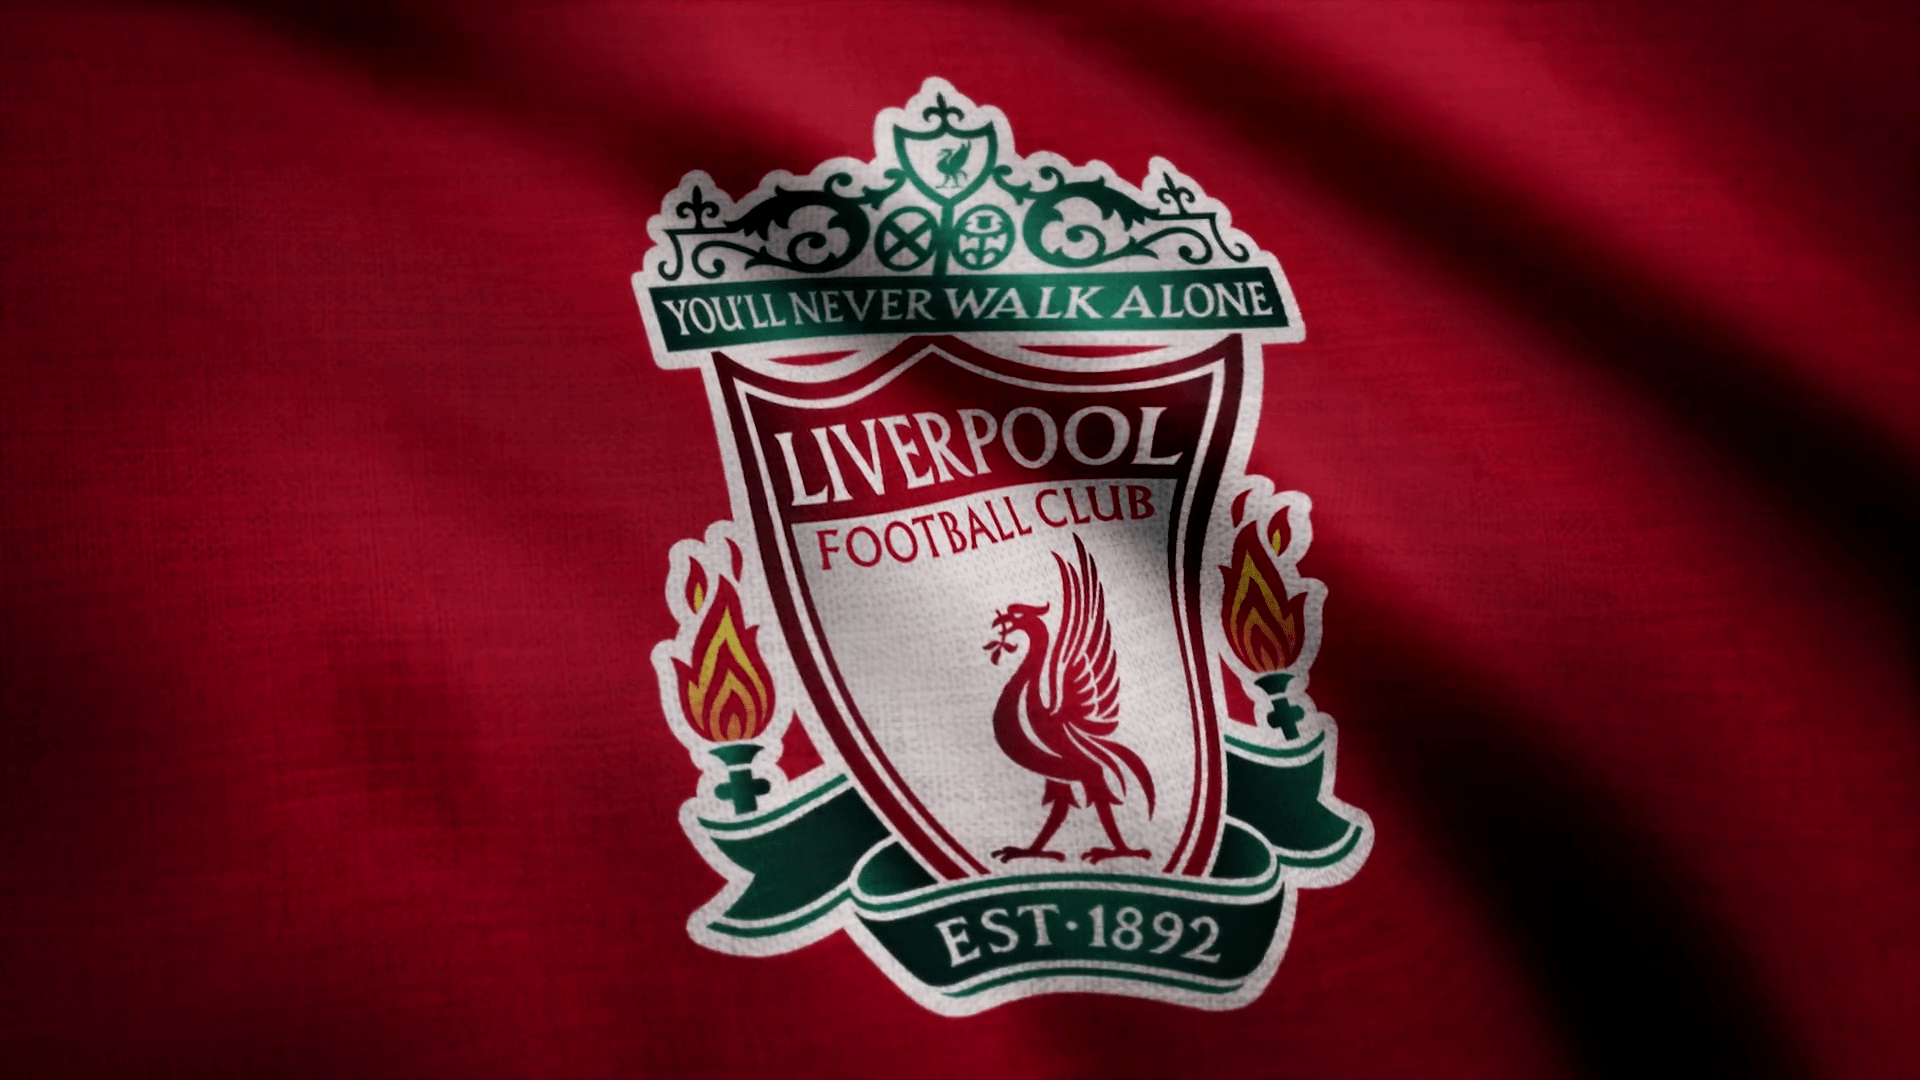 EPL: UEFA declares Liverpool will not be champions if Premier